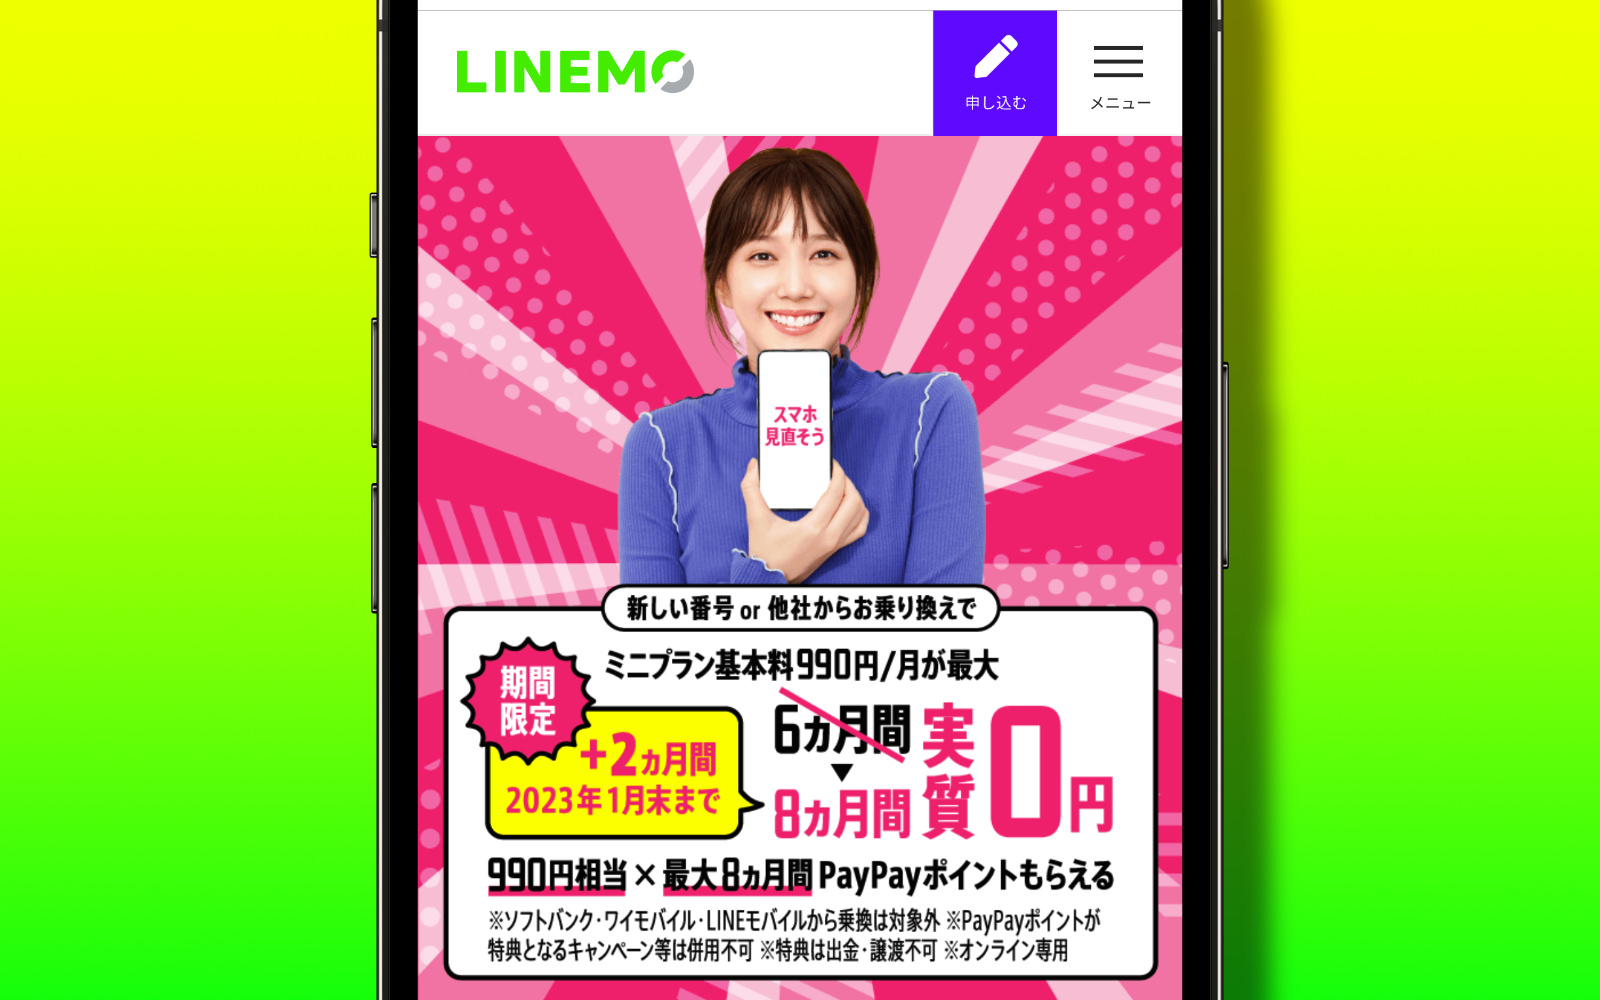 LINEMO 8month Campaign